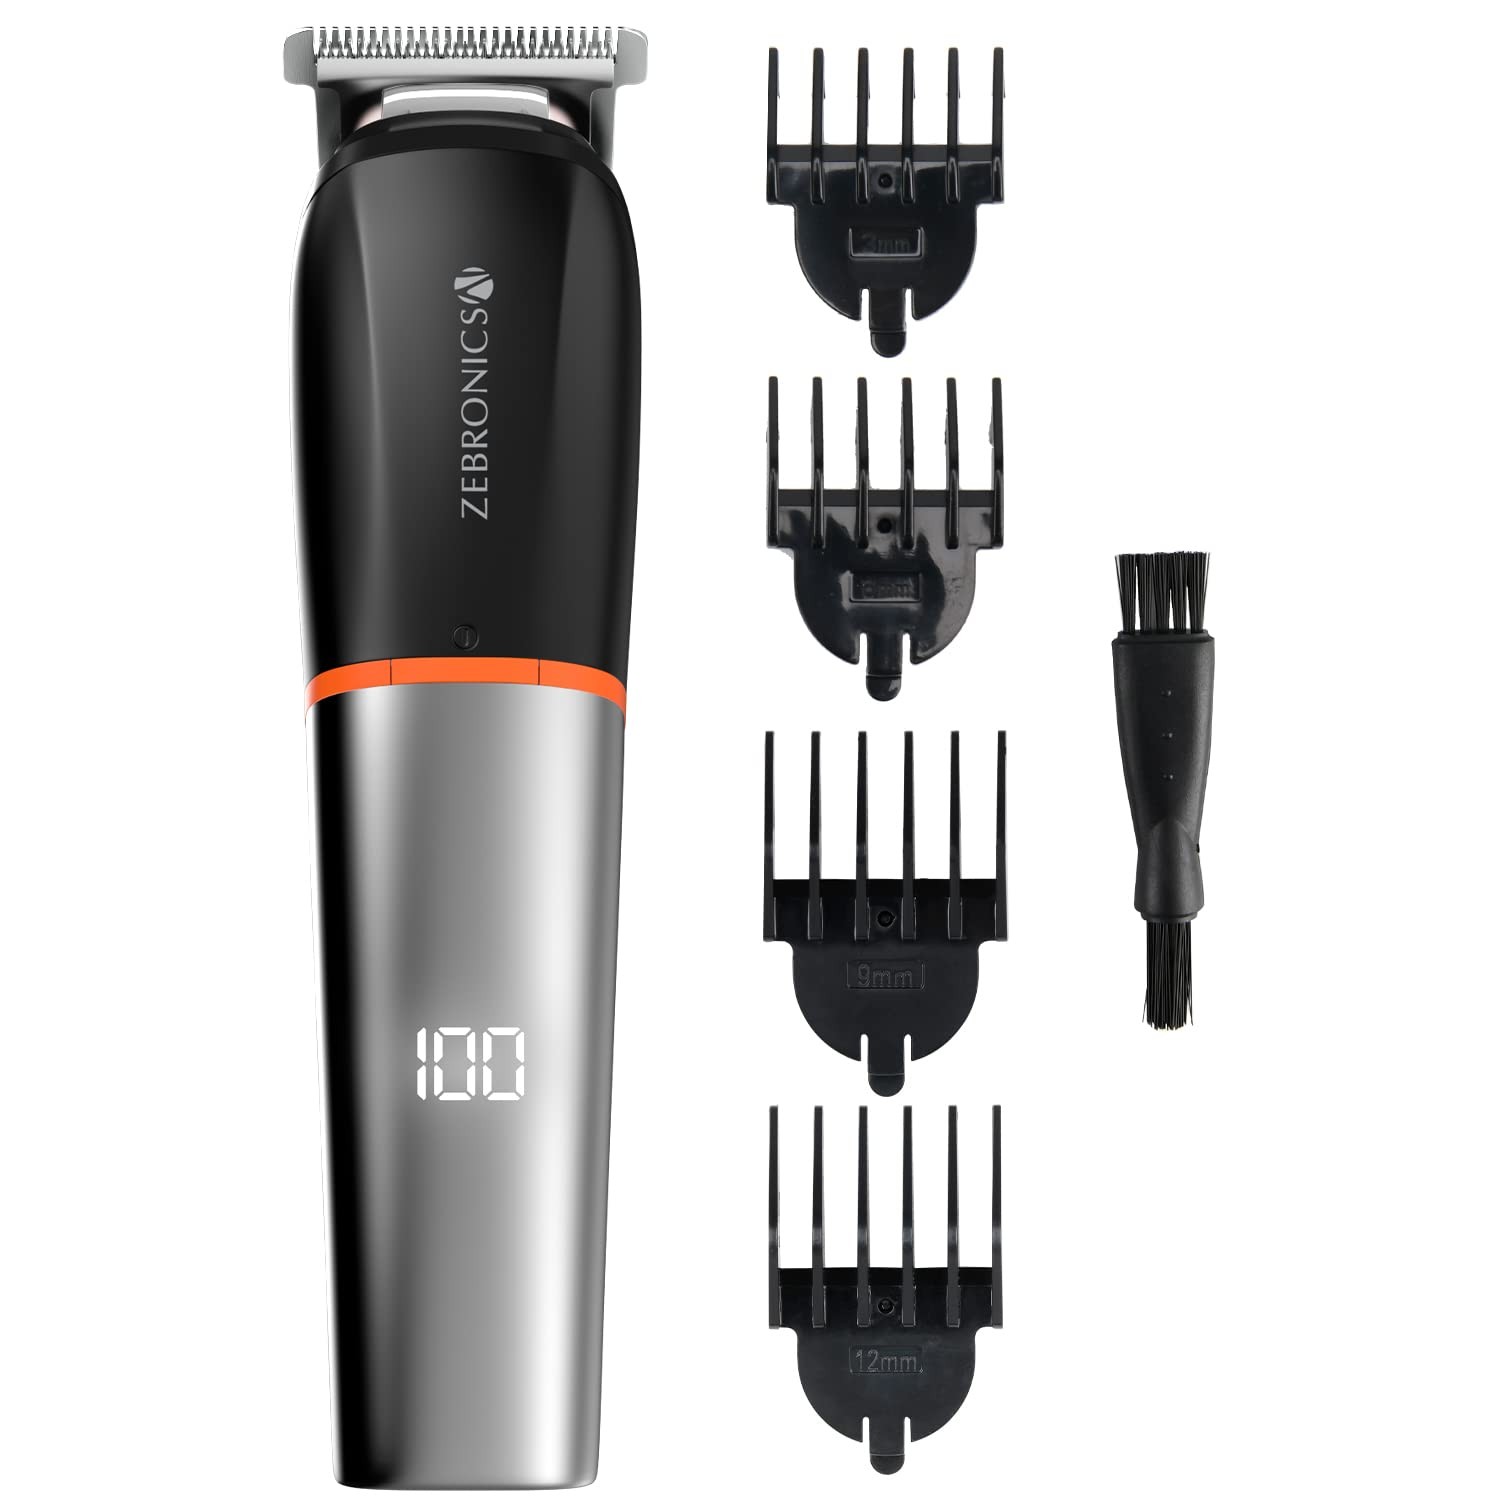 Zebronics ZEB-HT105 Corded/Cordless Use Trimmer with up to 90 Mins USB Fast Charge, IPX6, LED Display, 2 Speed Modes, Rounded Tip Stainless Steel Blade